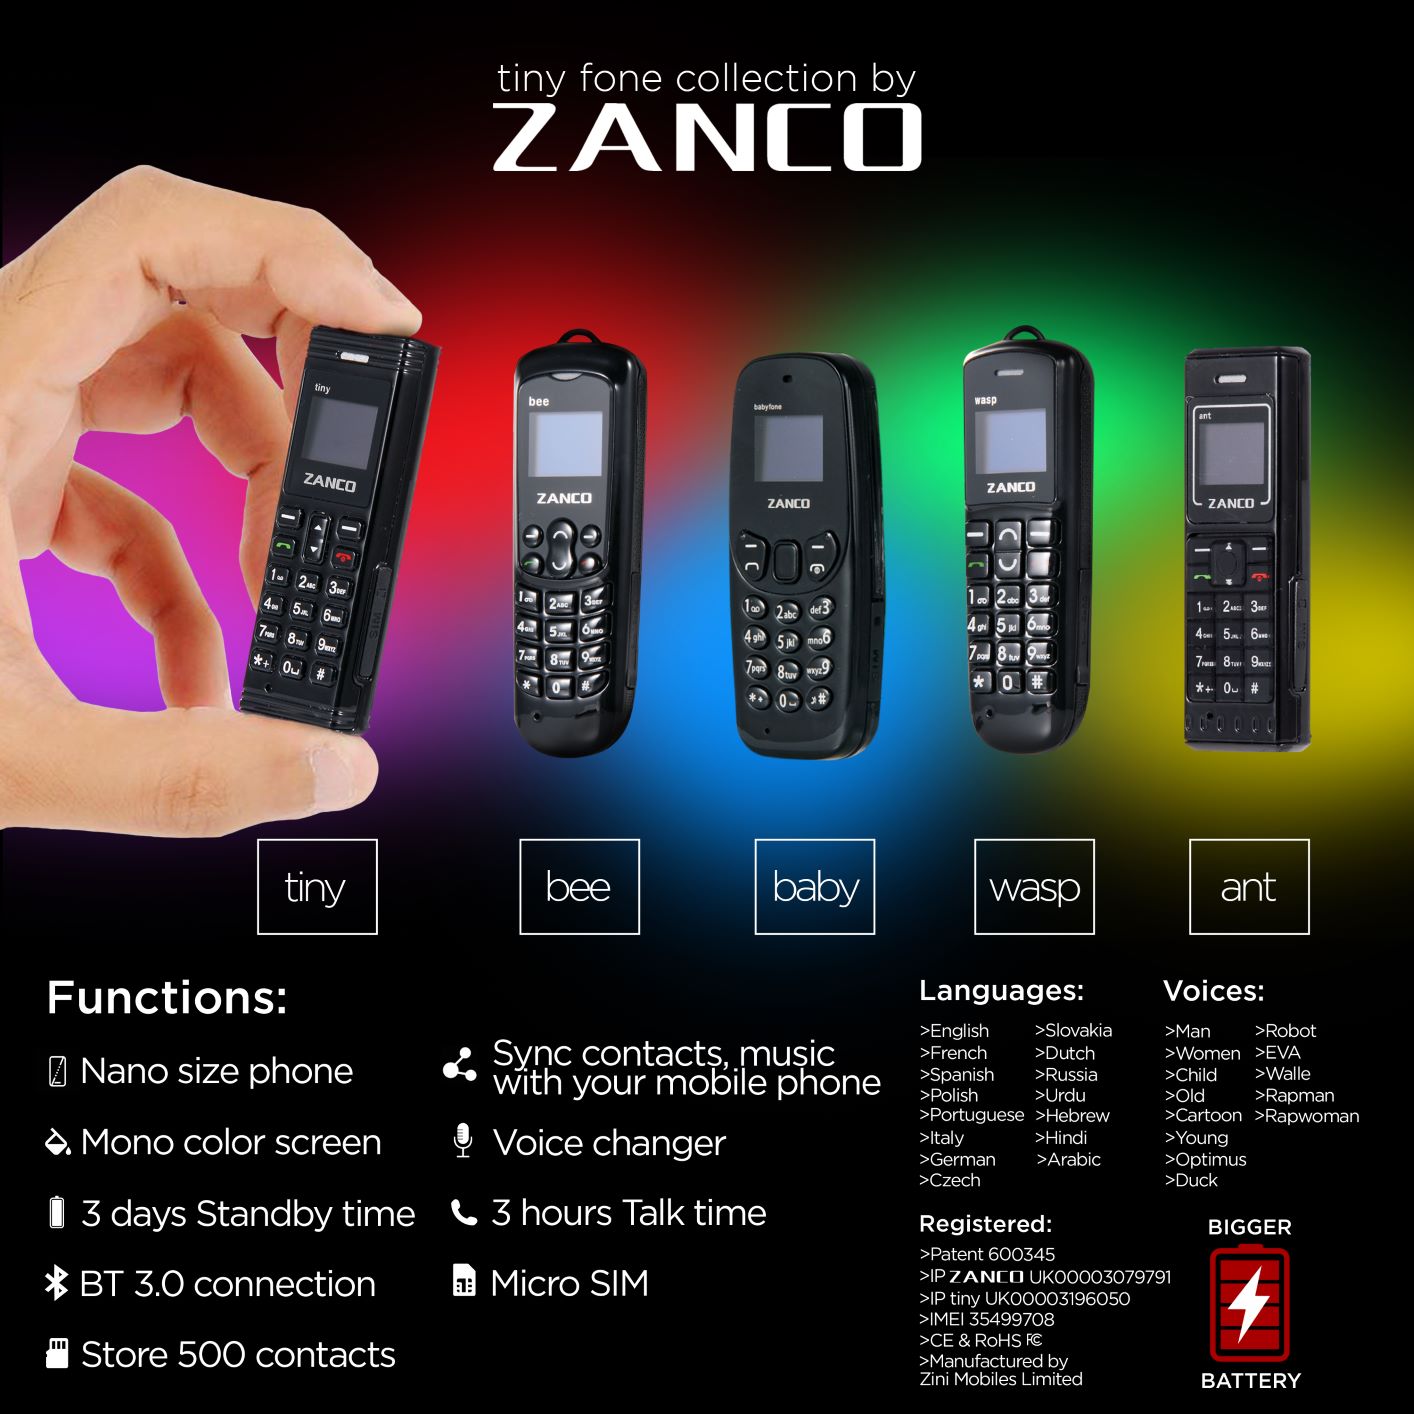 ZANCO x 50 tiny fone collection mixed zanco mini phones cellular phone unlocked cell phone mobile phones Buy factory direct